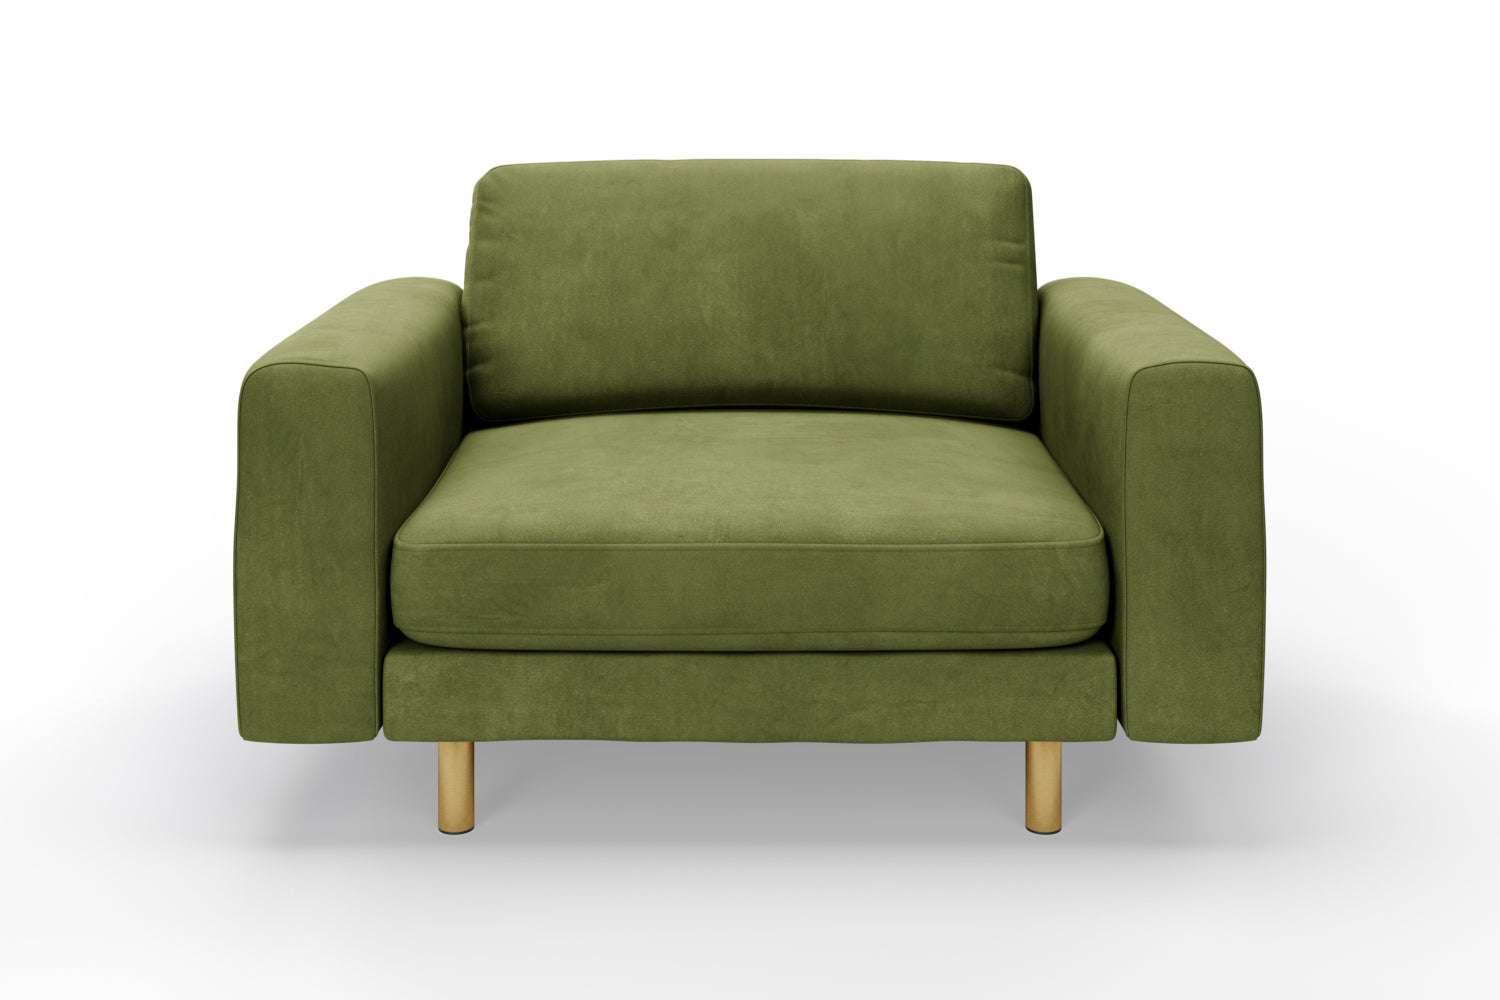 SNUG | The Big Chill 1.5 Seater Snuggler in Olive variant_40414876205104